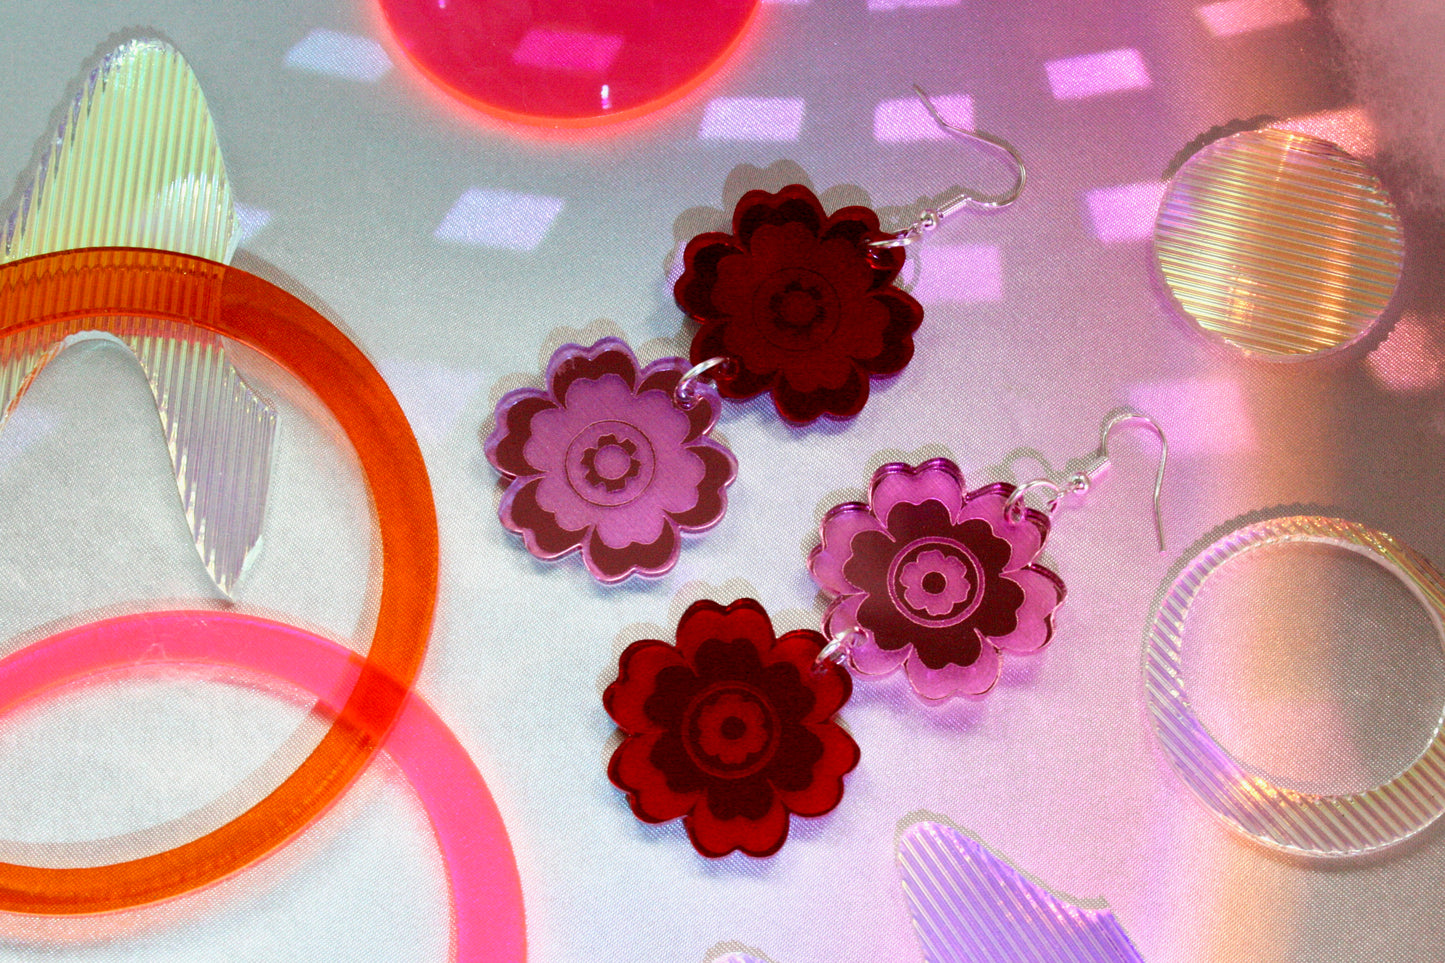 Double Flower Earrings- Reflective Red Pink Unique Art Deco